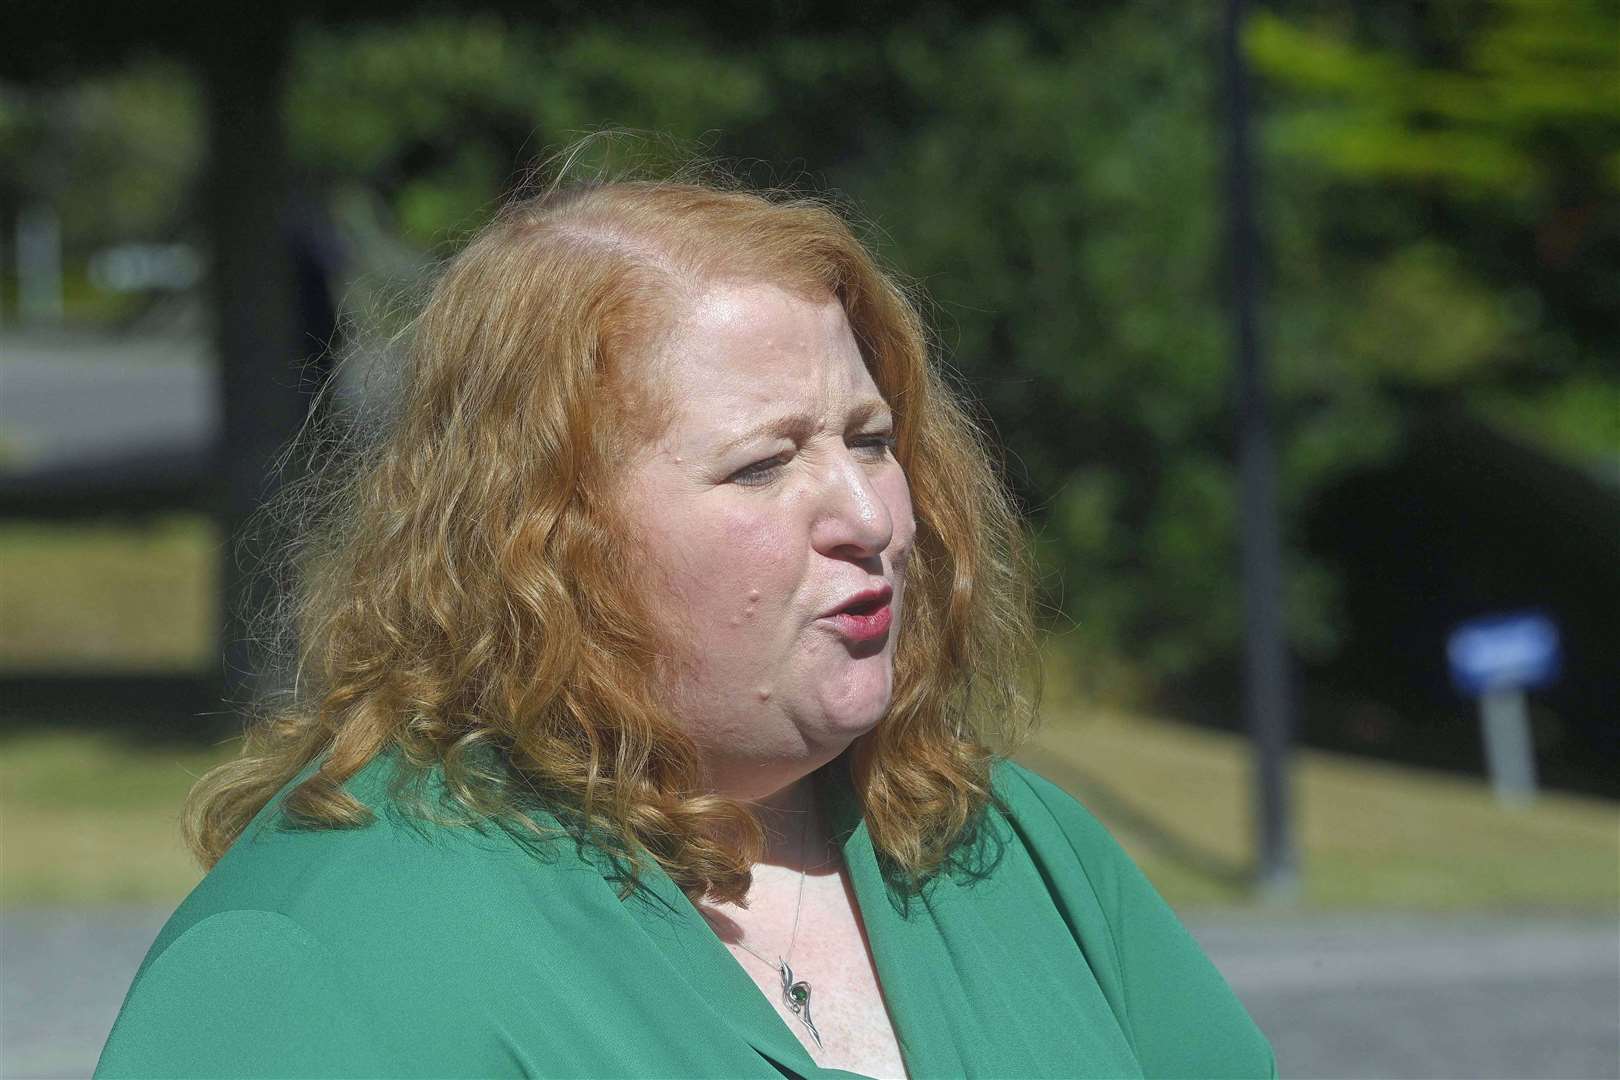 Alliance Party leader Naomi Long said the loss of the Queen would be felt keenly by many (Mark Marlow/PA)